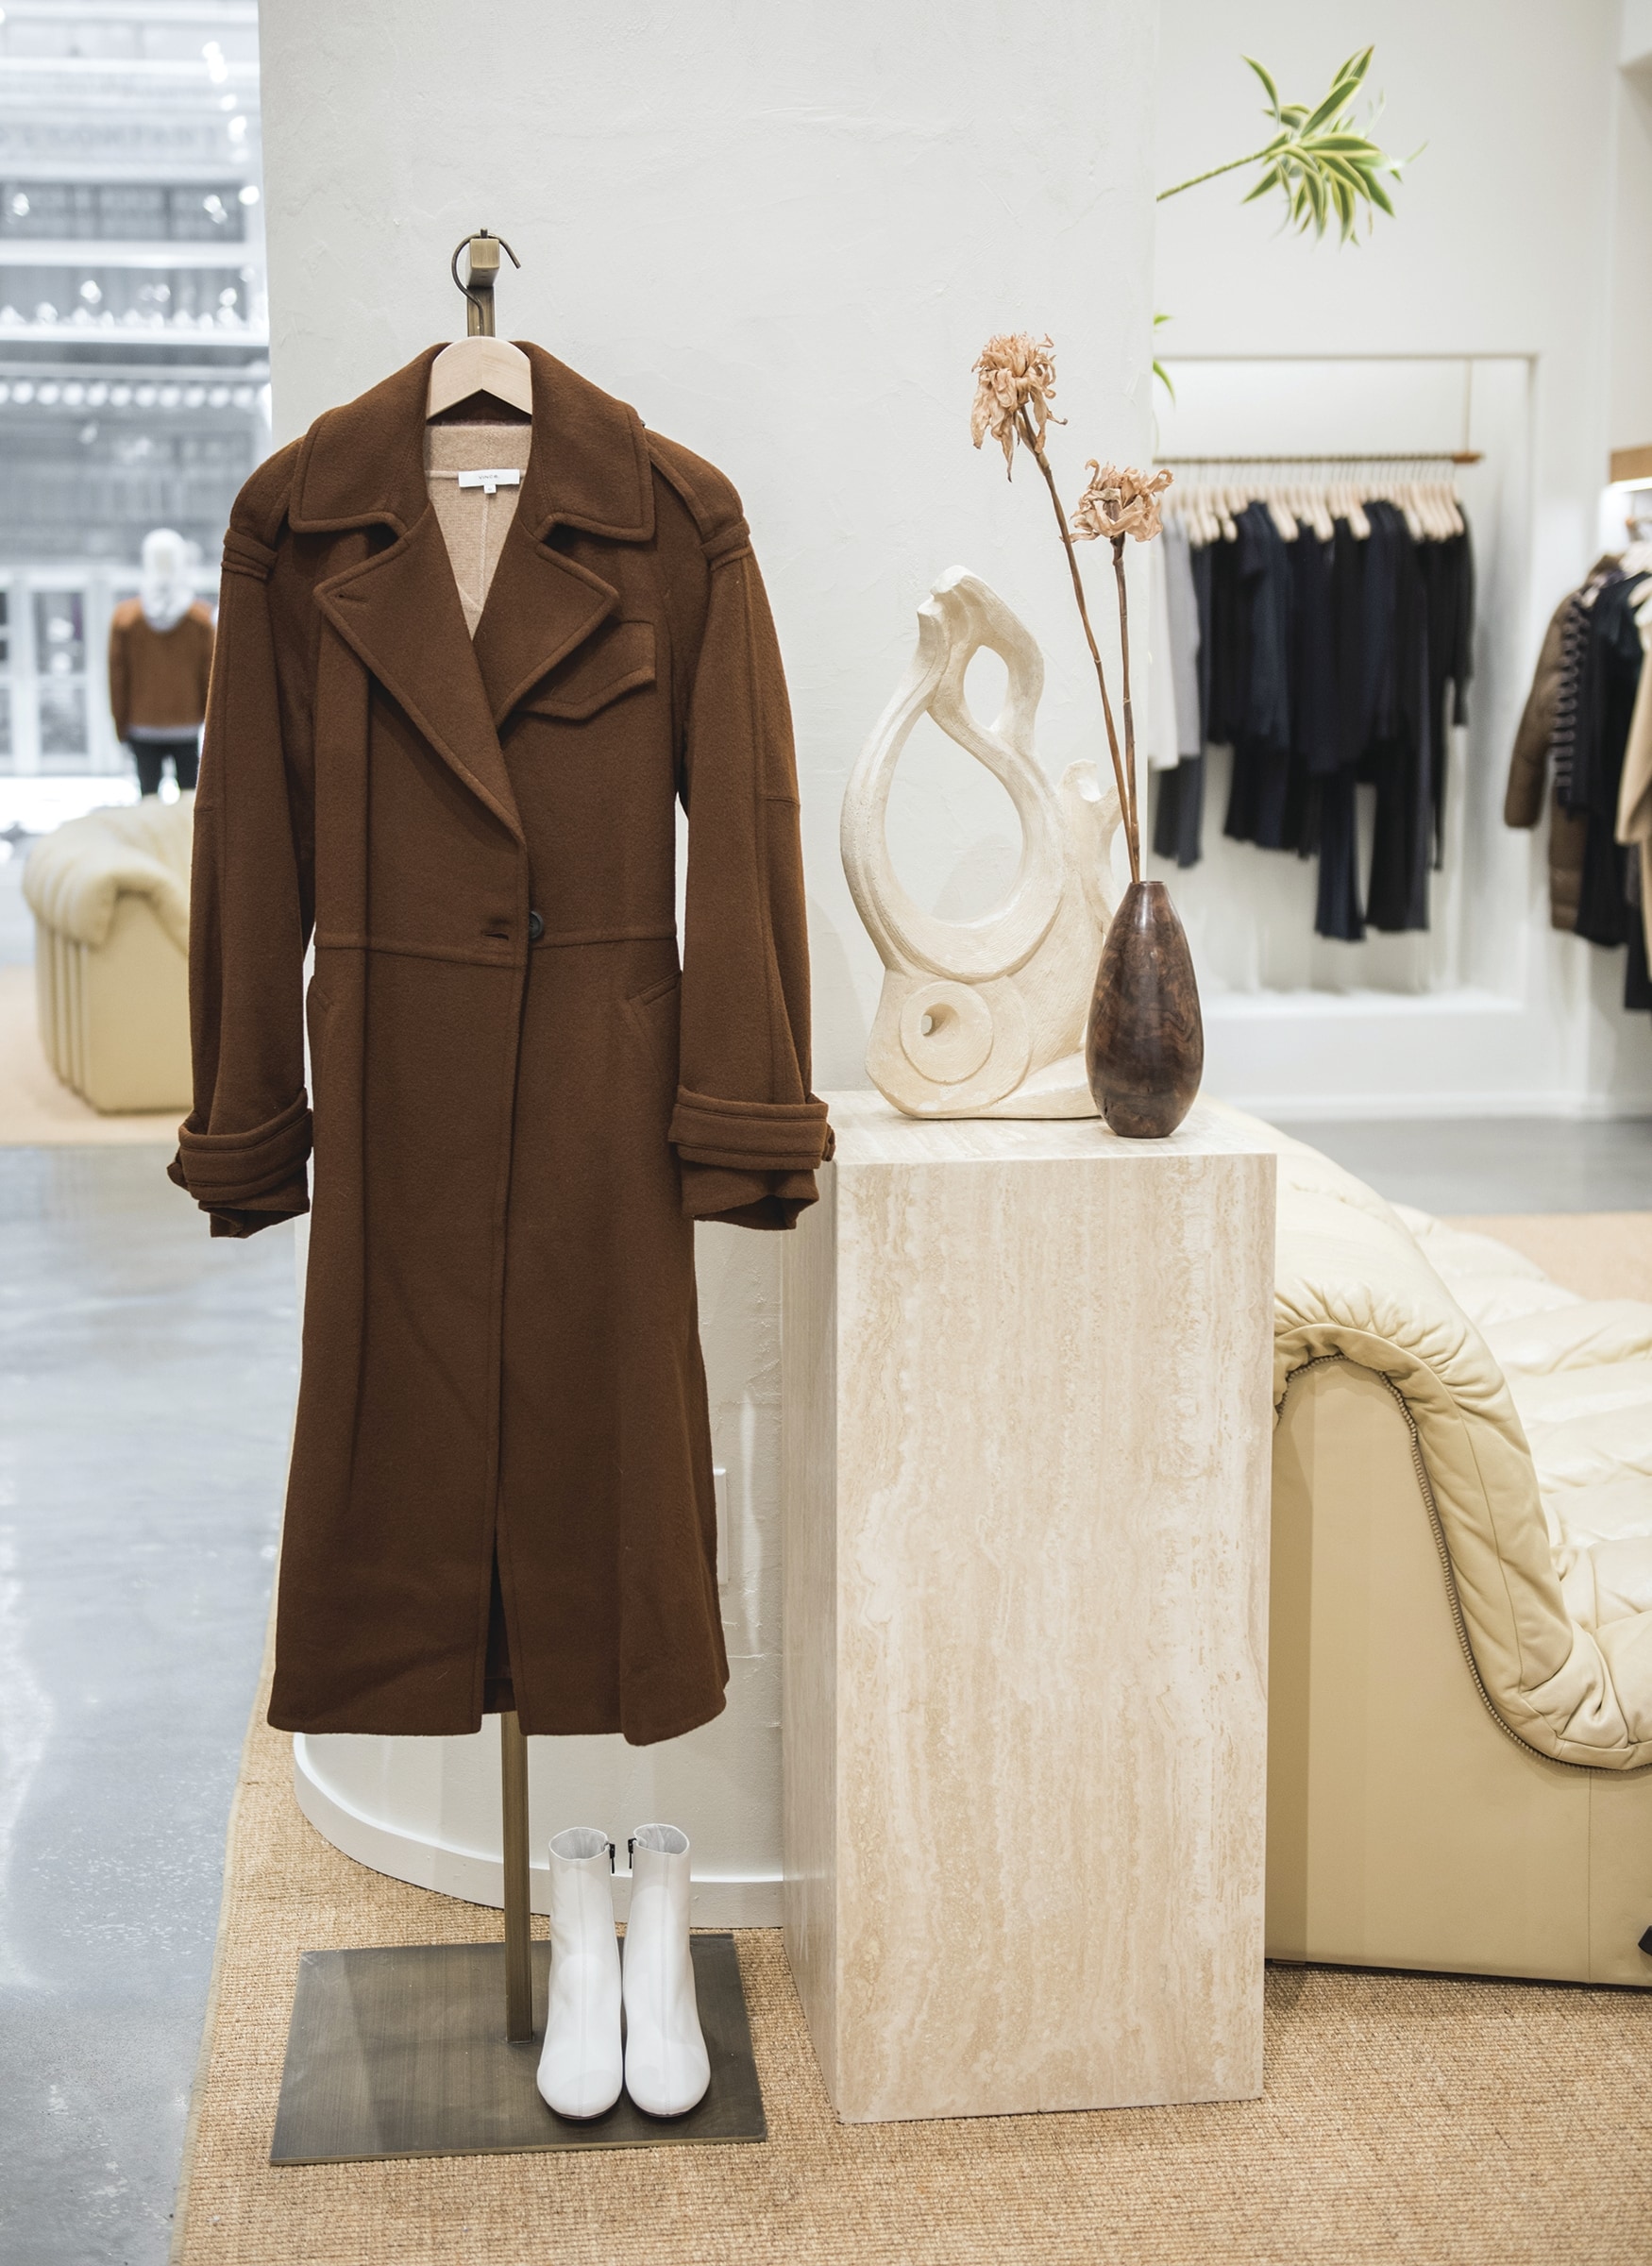 4 New Store Openings For Holiday Shopping In NYC